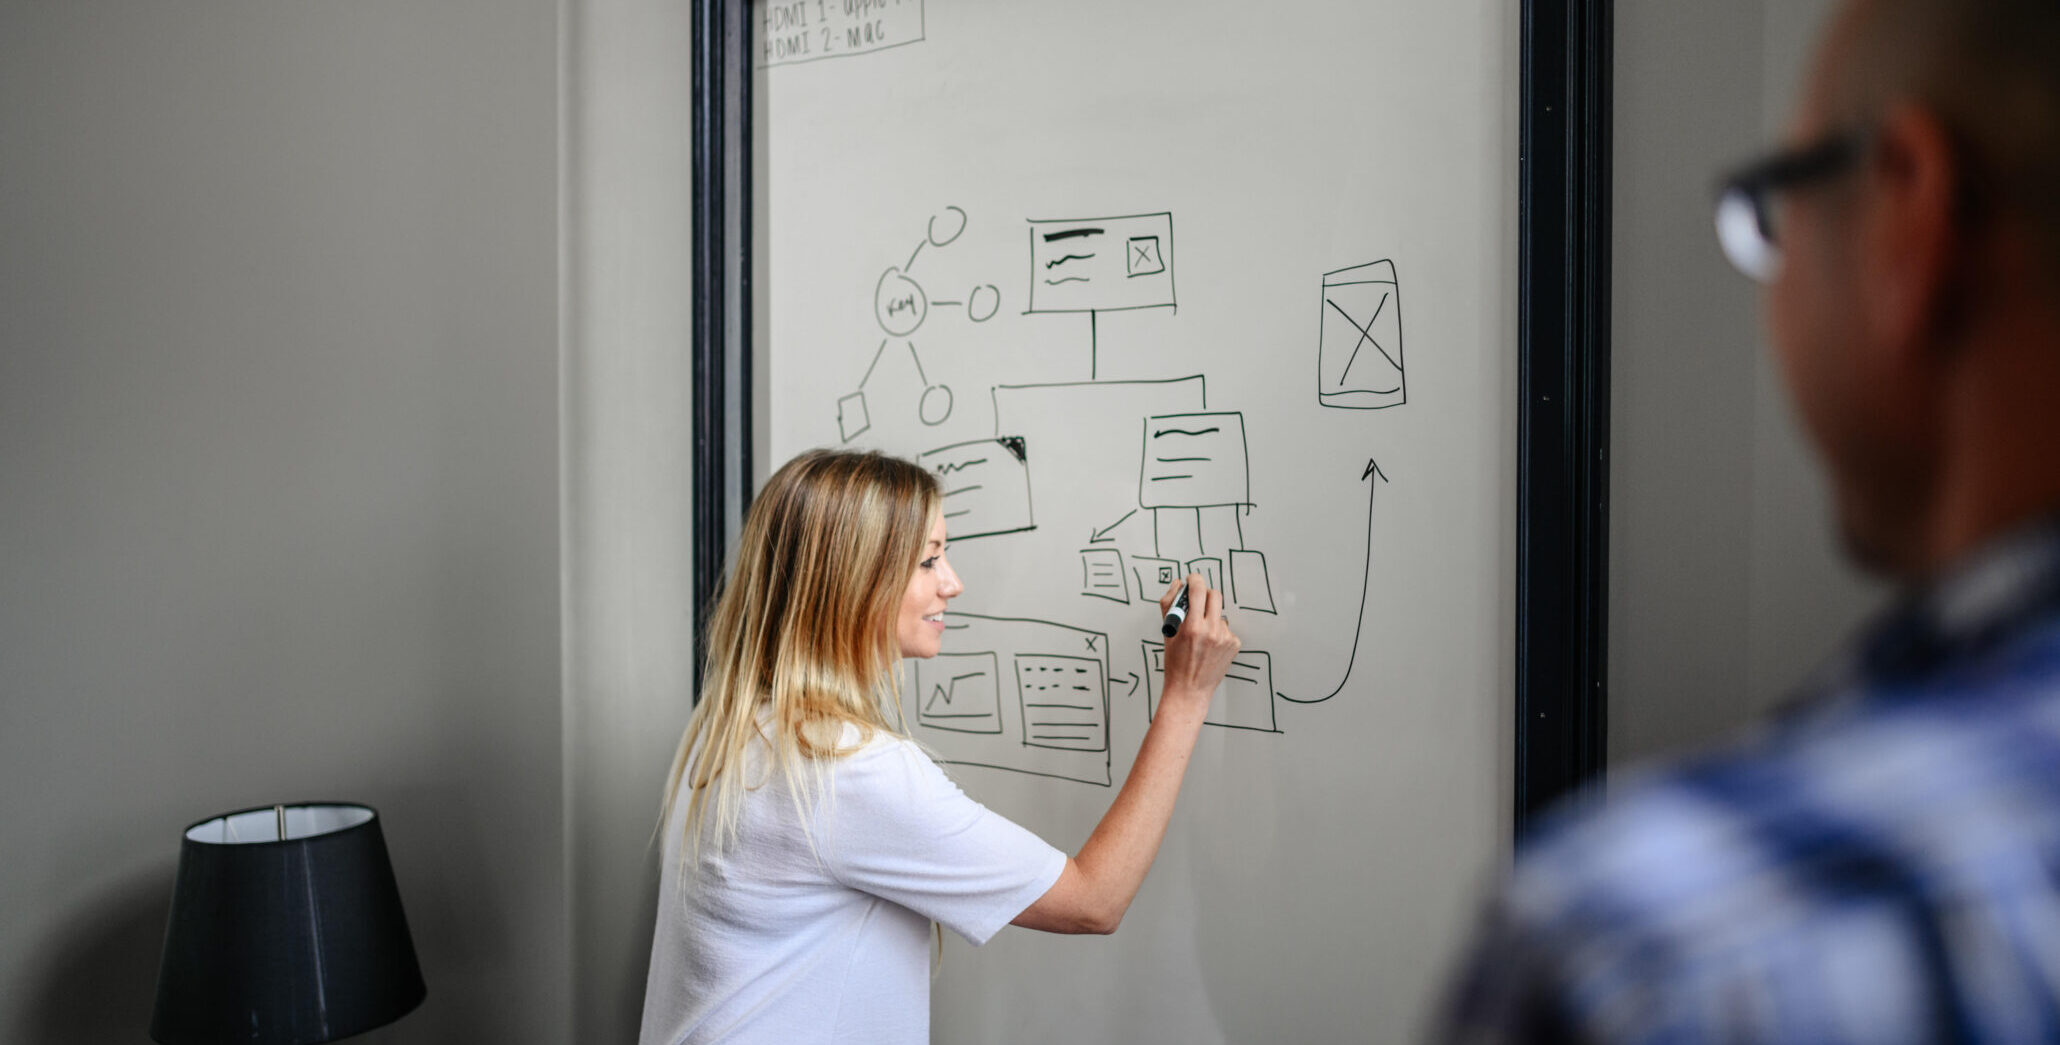 person drawing wireframes on a large whiteboard while another person observes